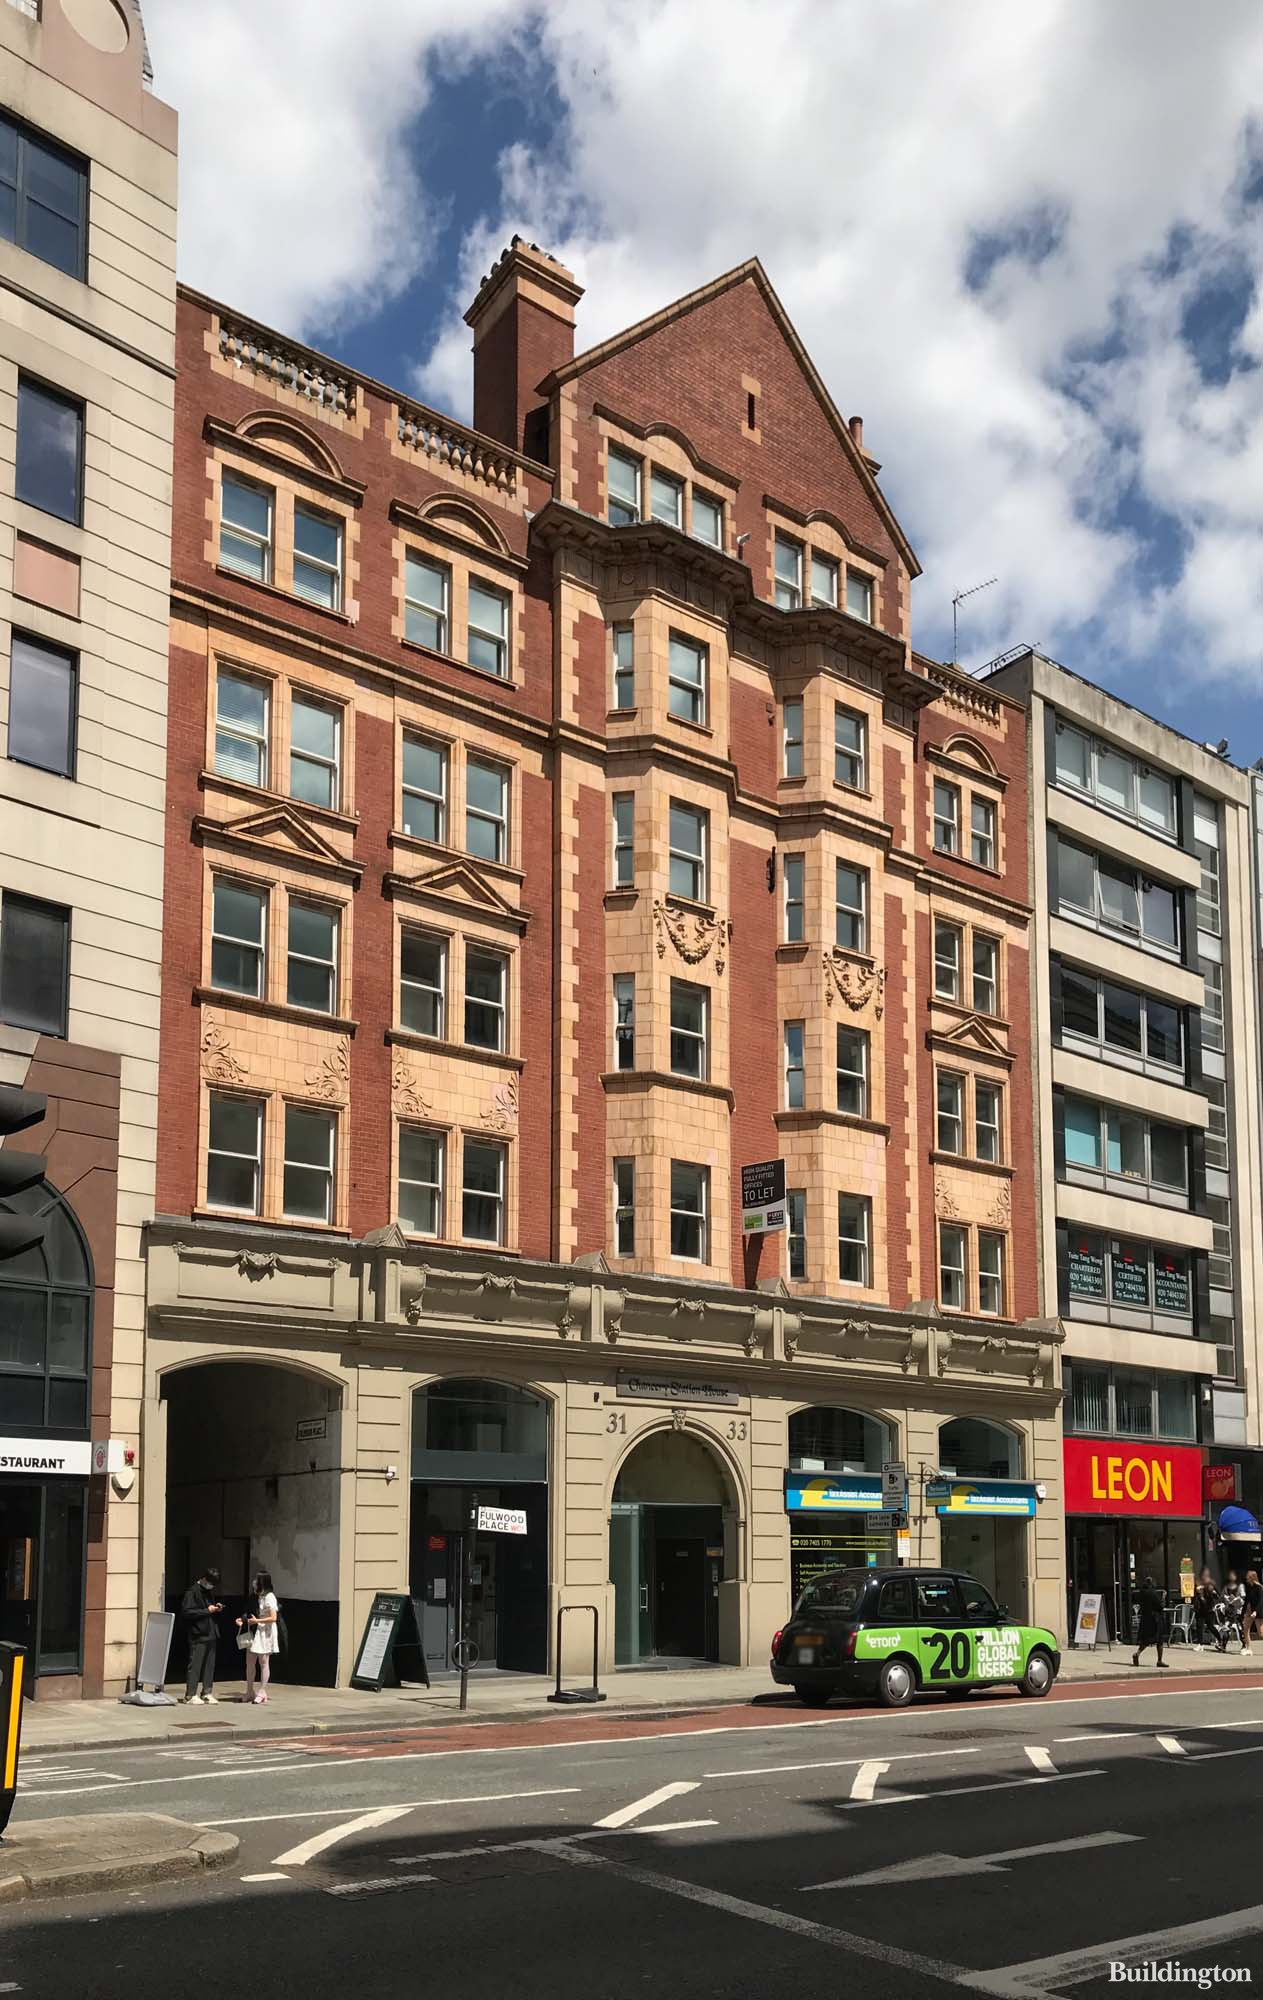 Chancery Station House at 31-33 High Holborn, London WC1.